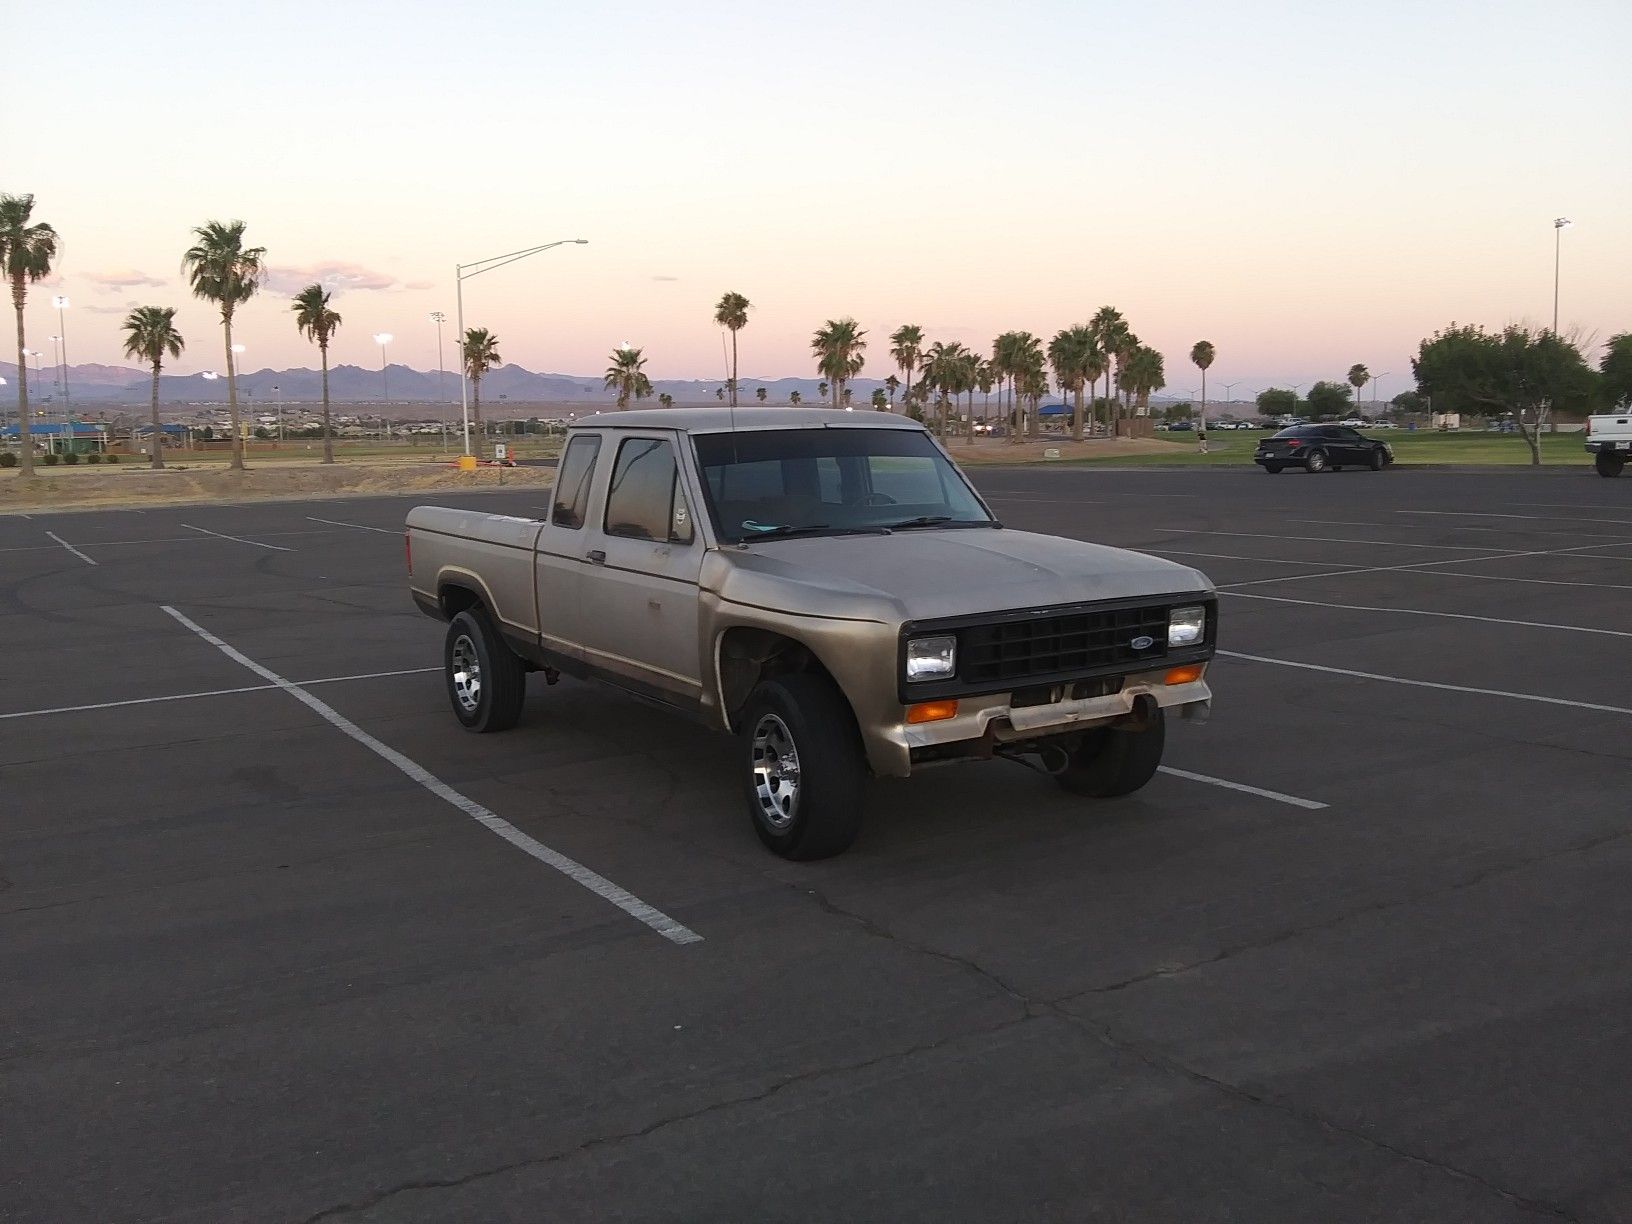 Ford Ranger daily driver. $1000